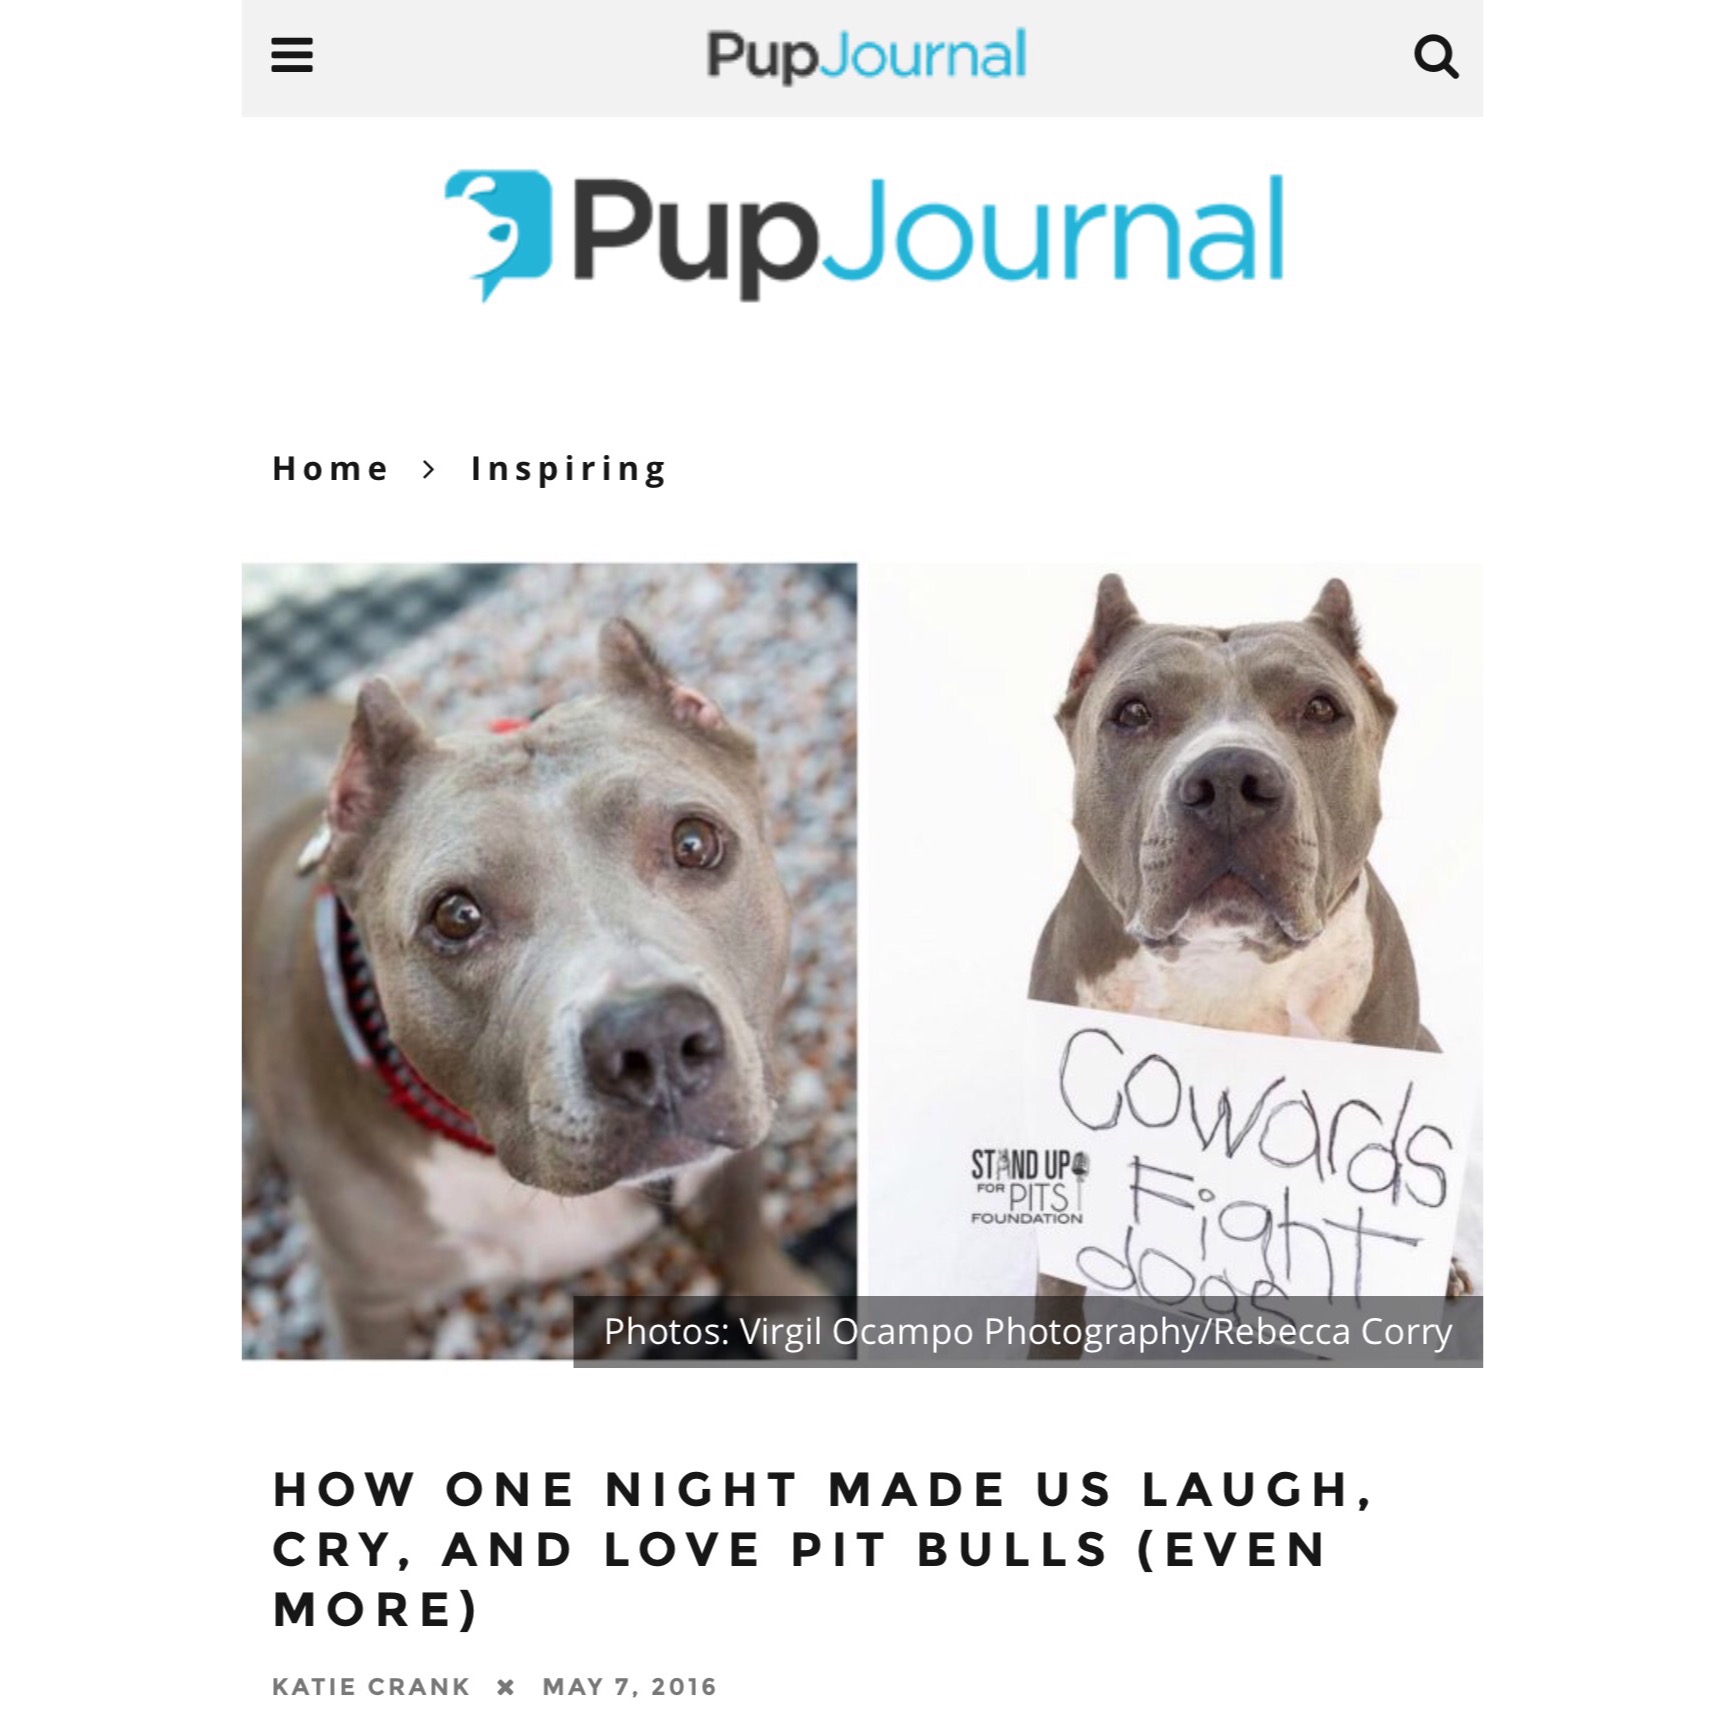 Thank you PupJournal